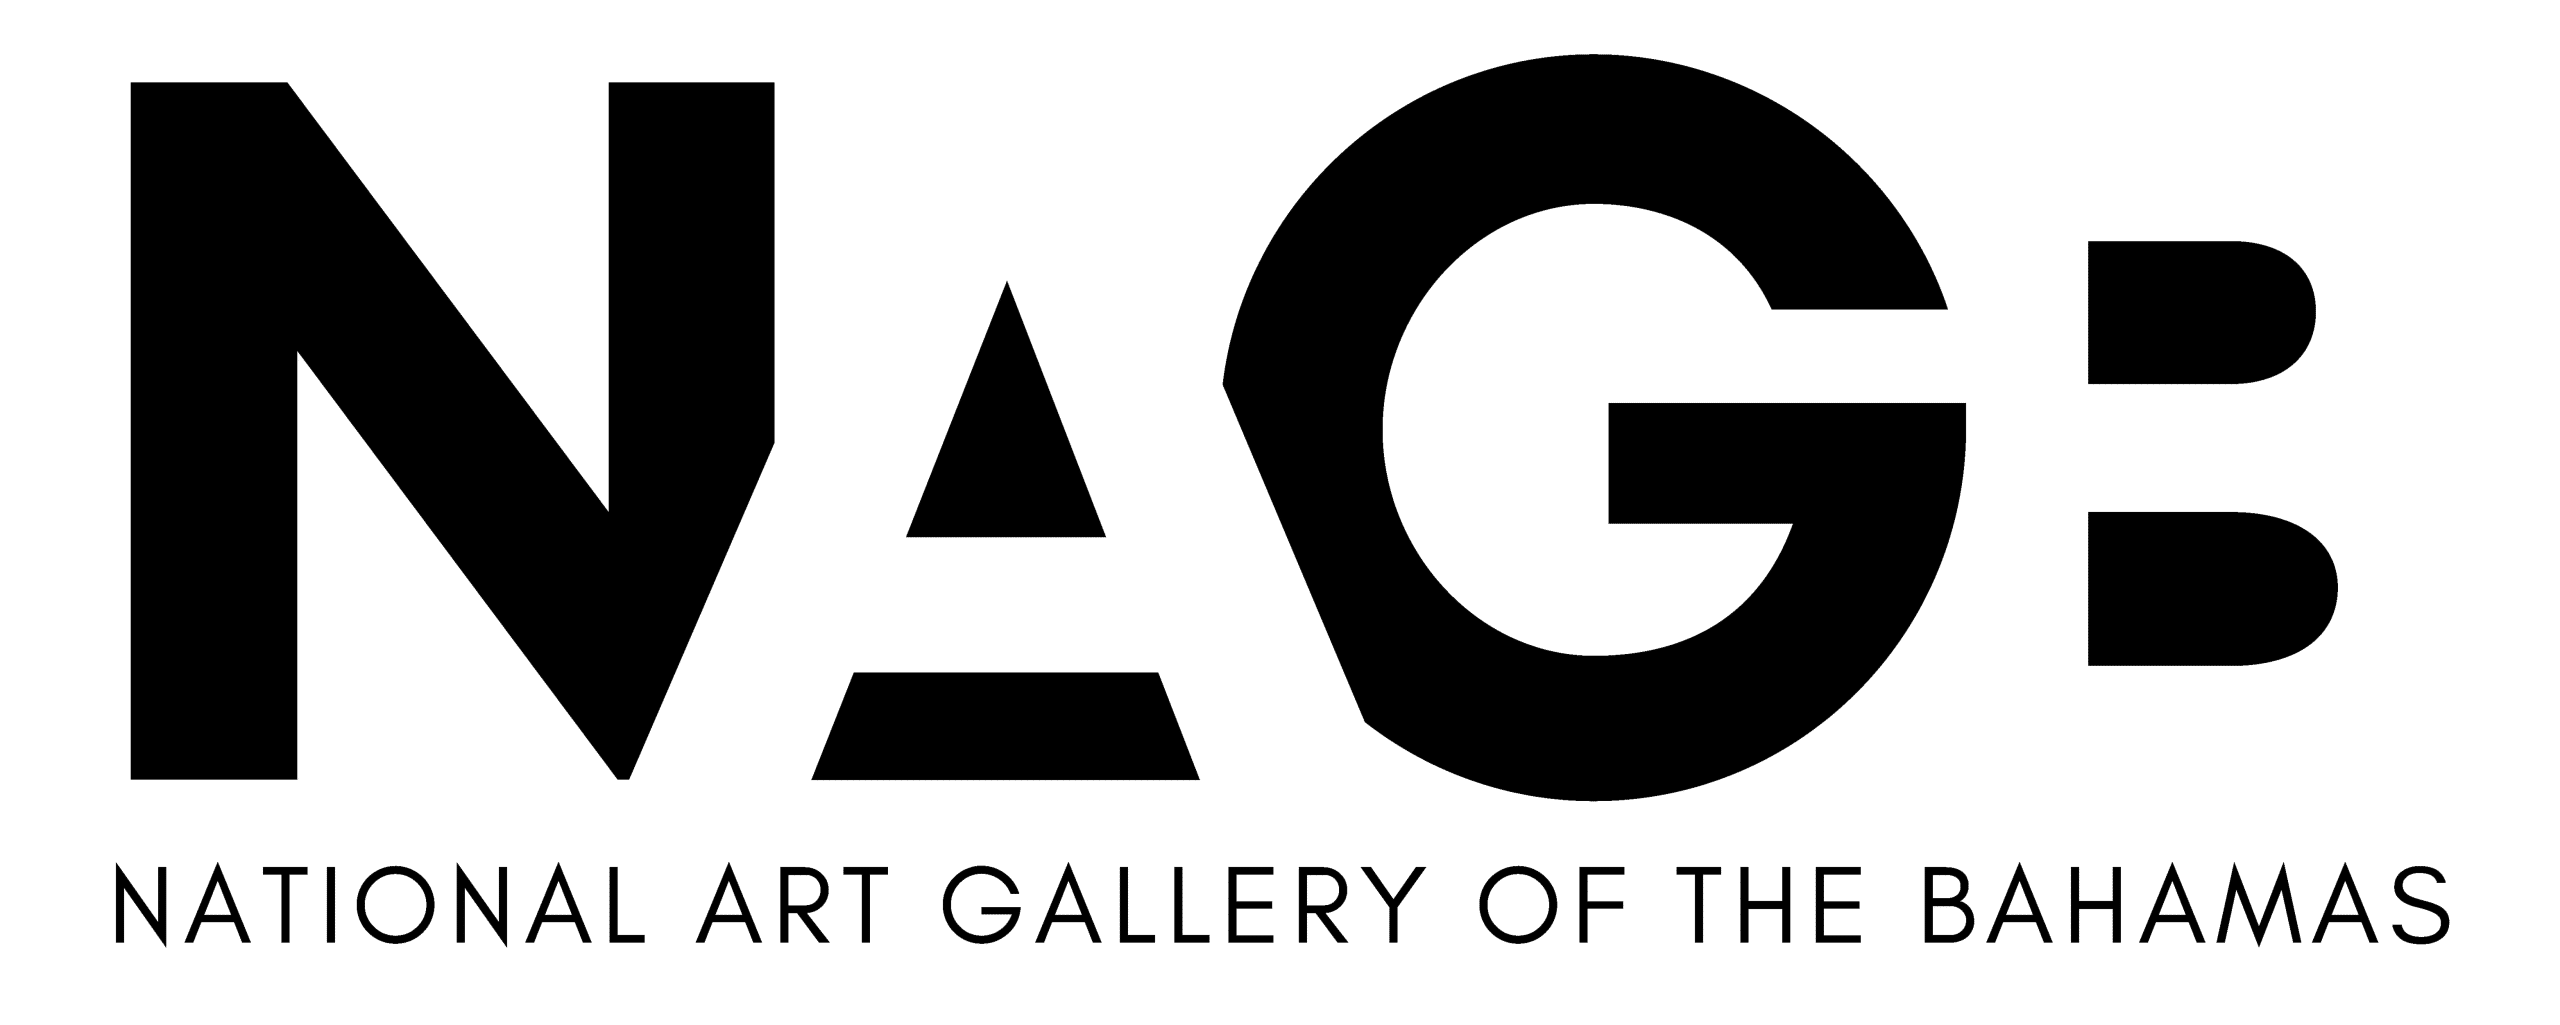 National Art Gallery of The Bahamas